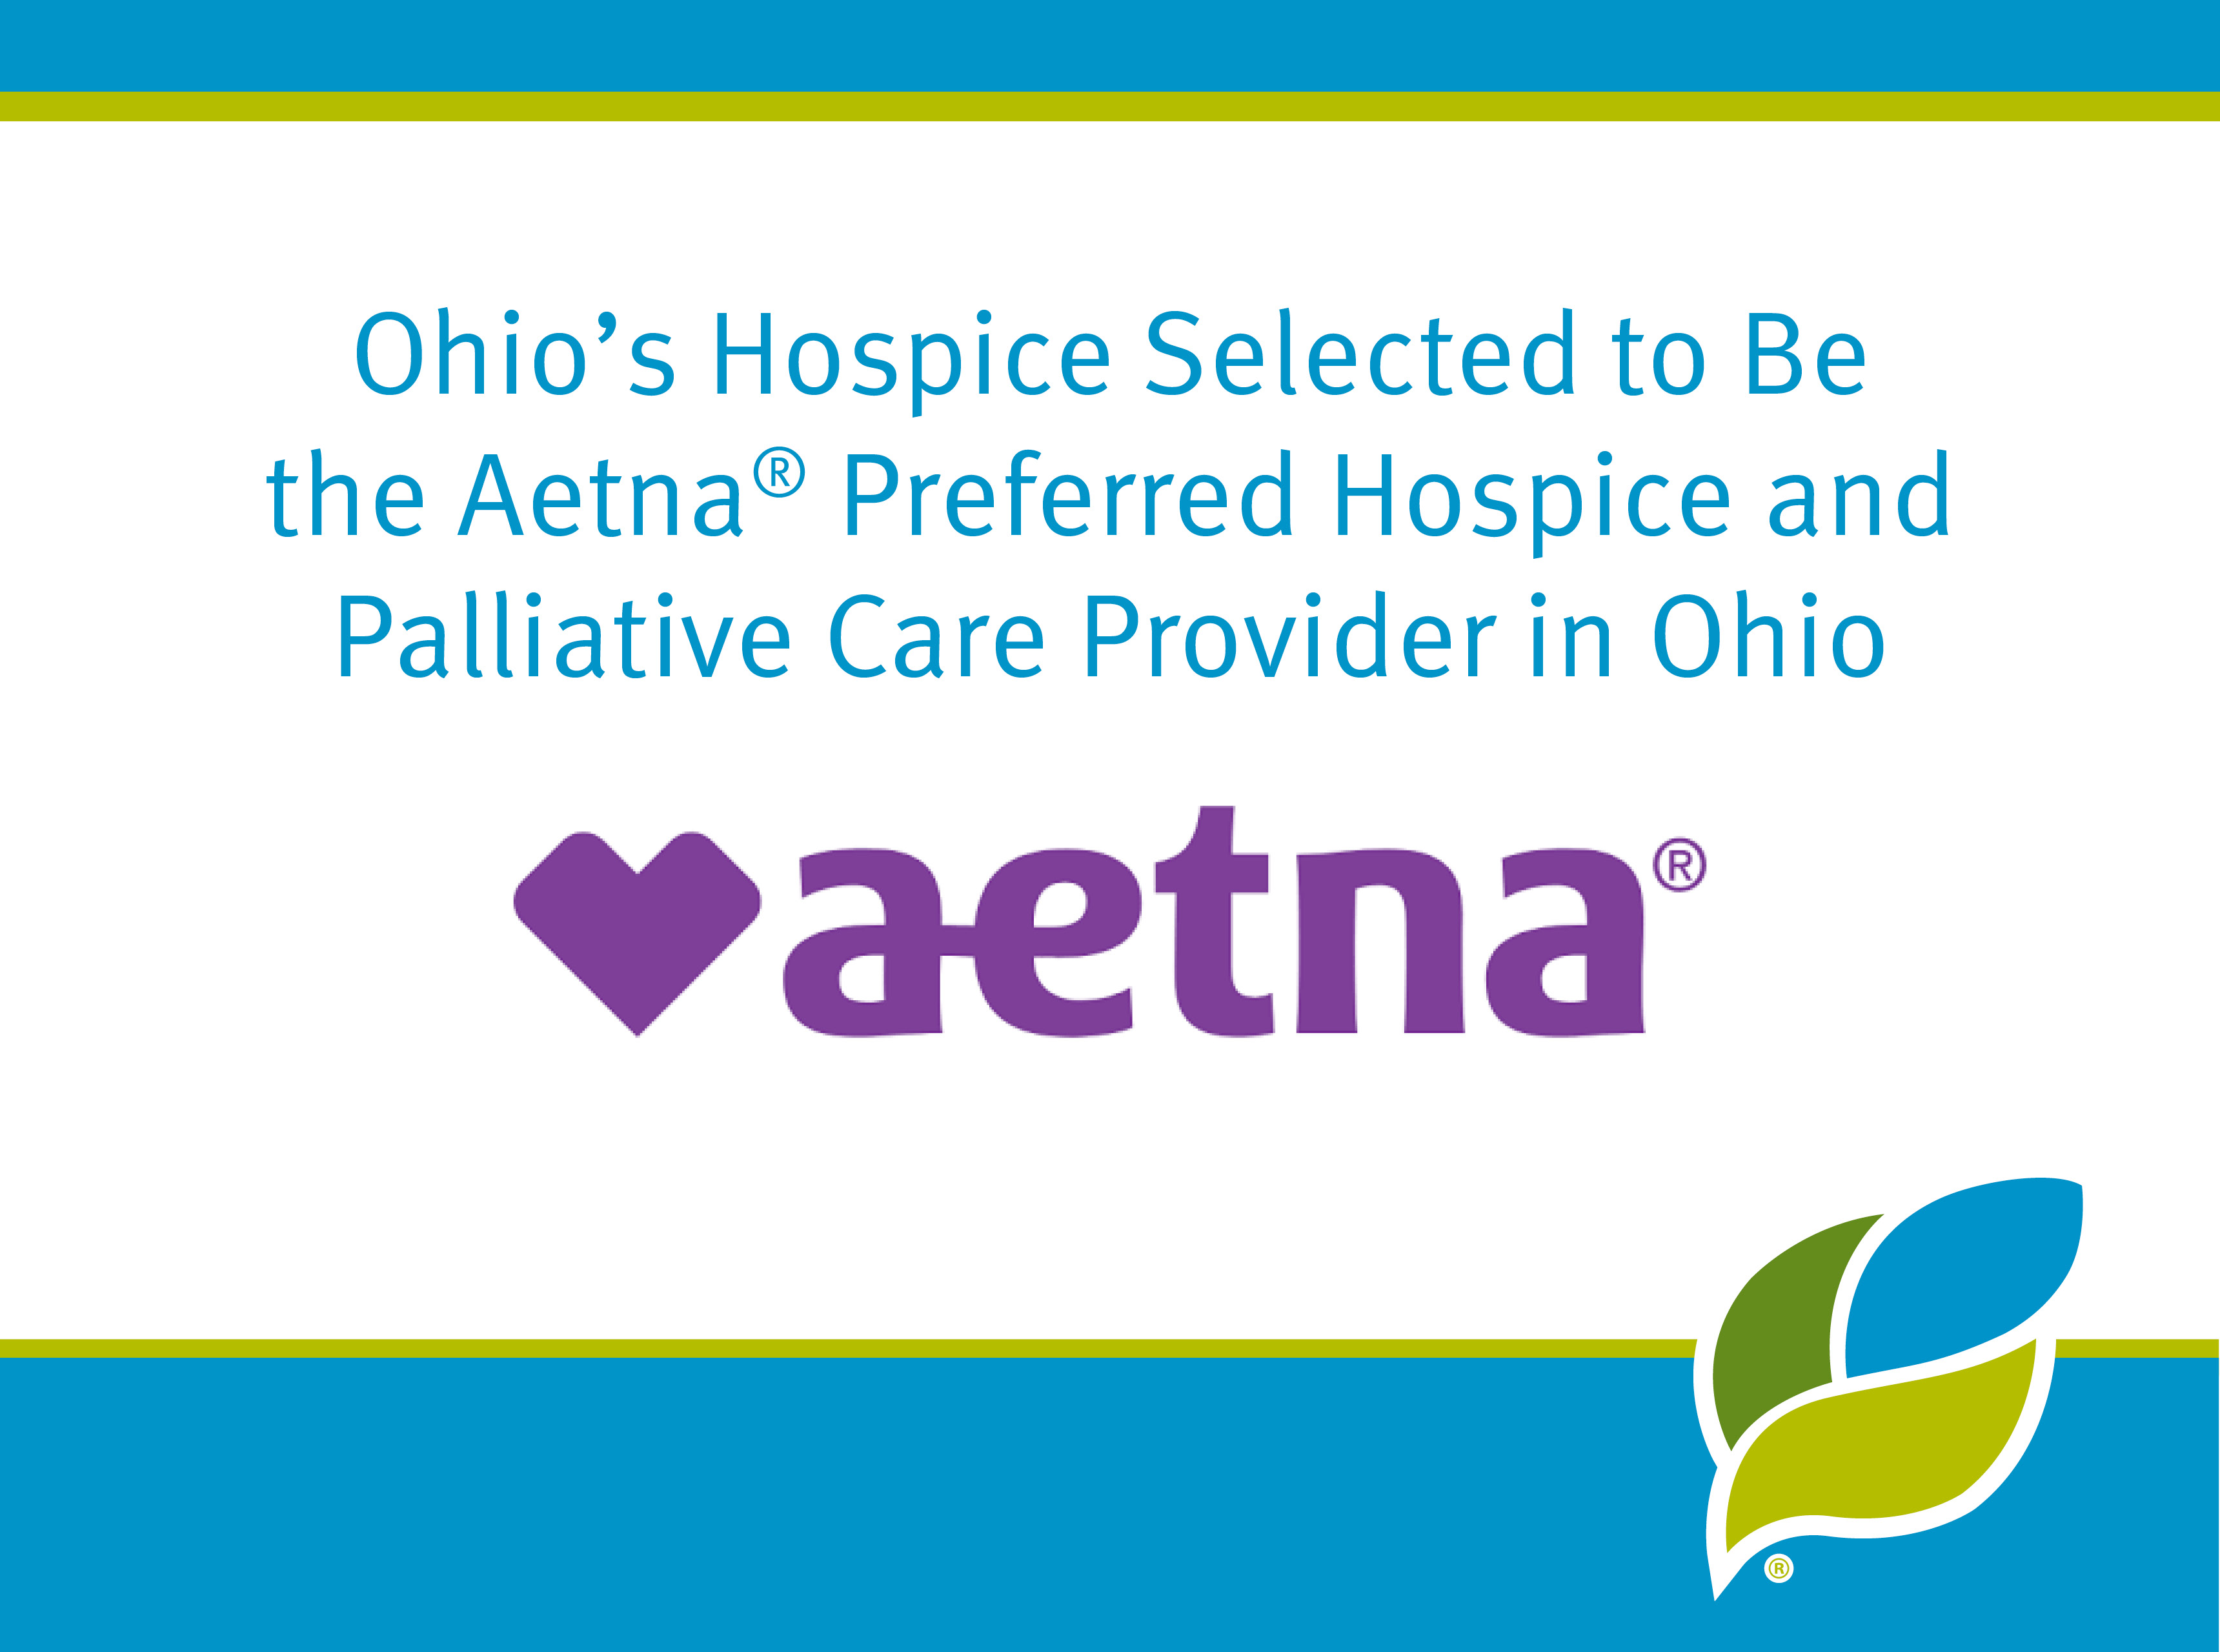 Ohio's Hospice Selected to Be the Aetna® Preferred Hospice and Palliative Care Provider in Ohio